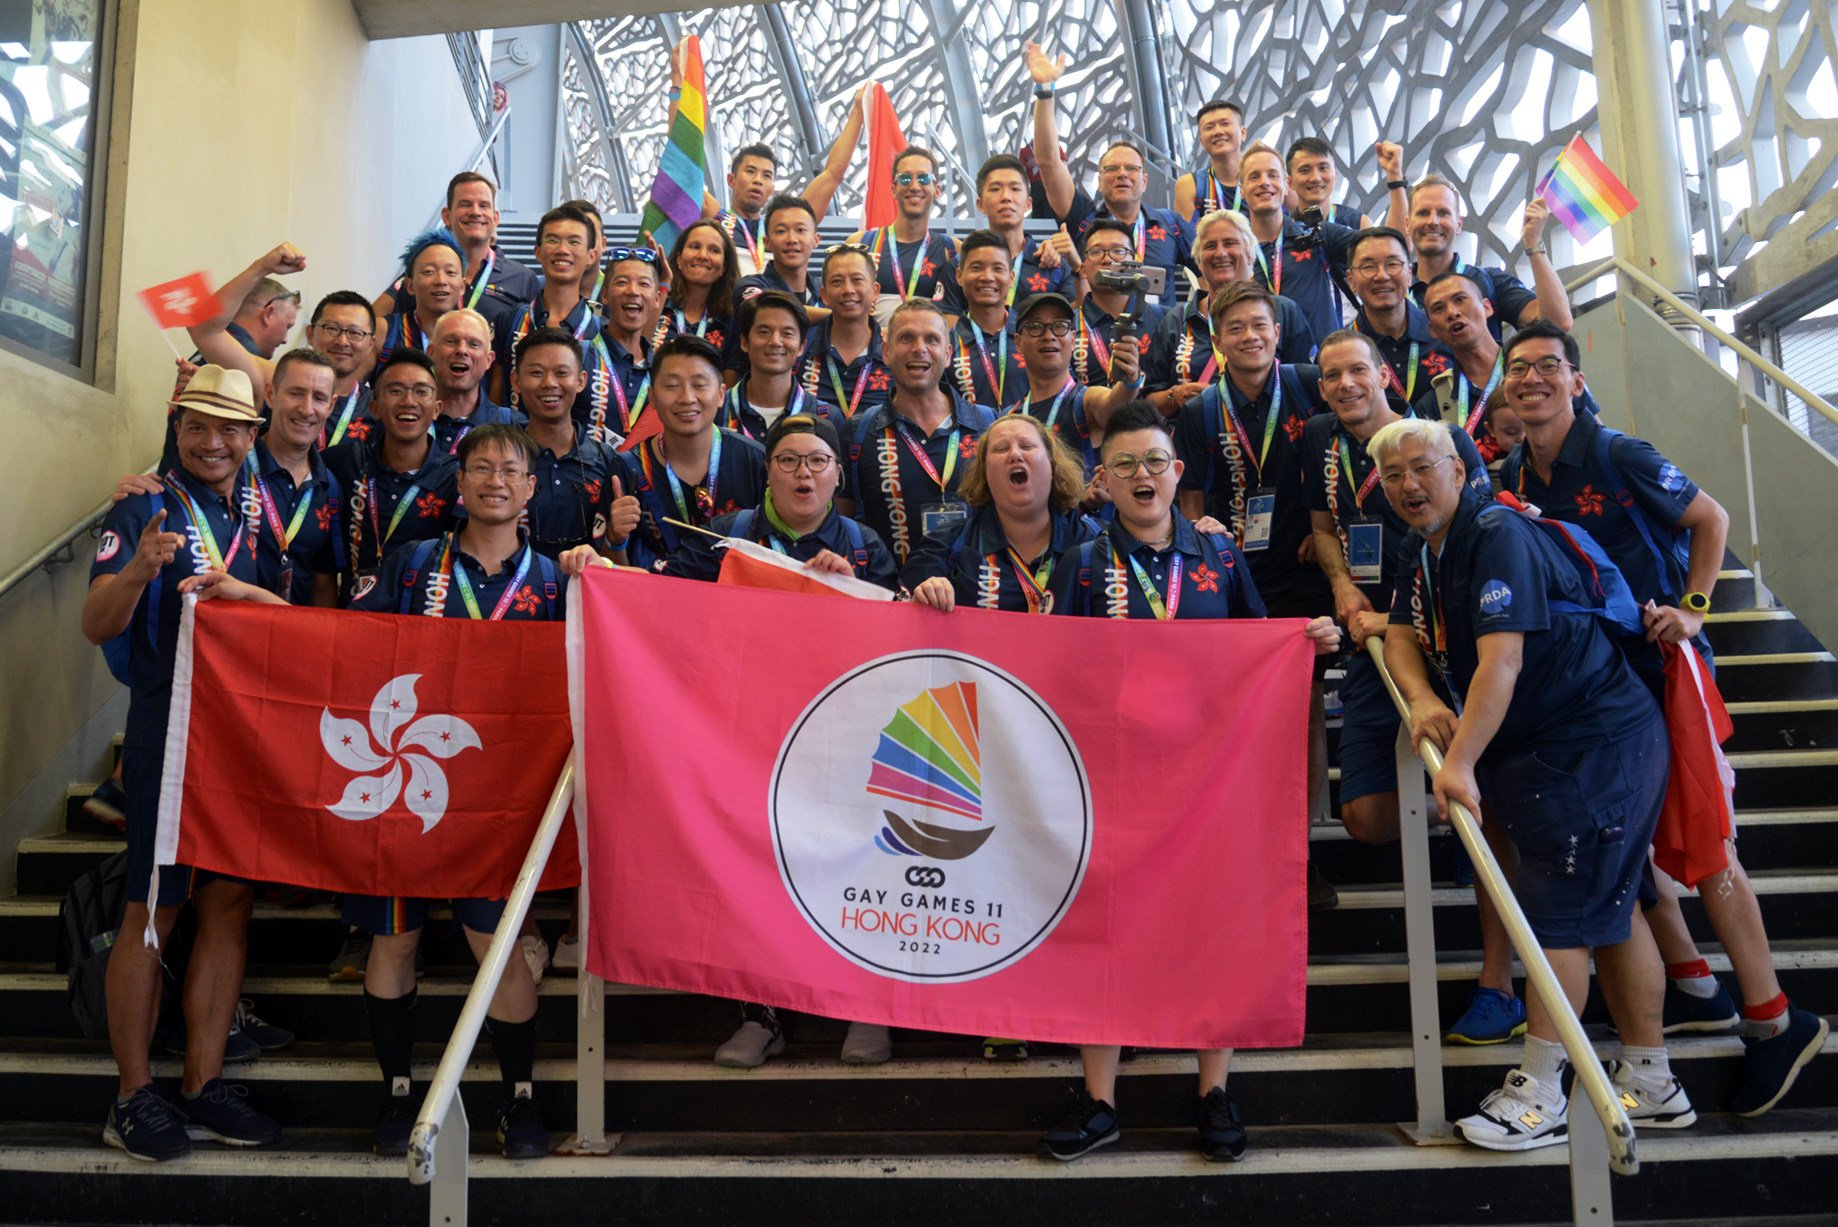 The Gay Games event in Hong Kong was originally set to kick off last year, but was delayed amid the pandemic. Photo: Handout